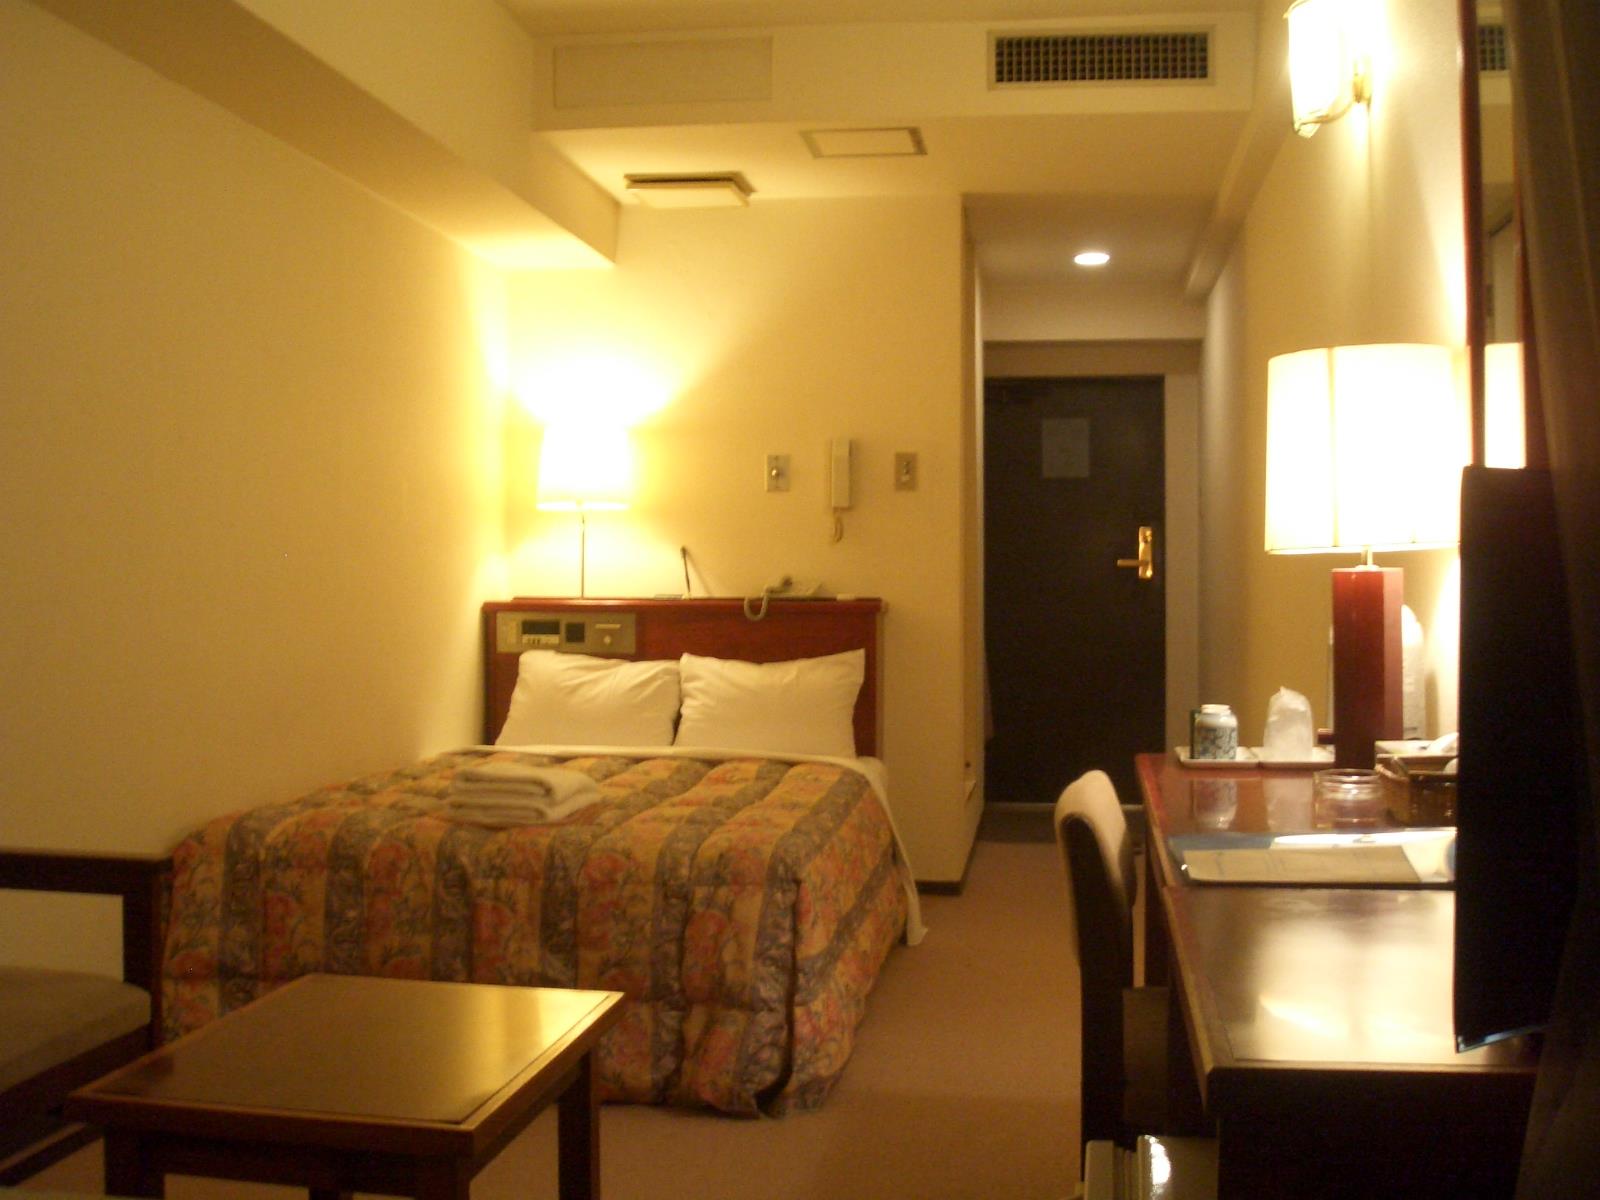 Sky Court Koiwa Hotel Japan FAQ 2016, What facilities are there in Sky Court Koiwa Hotel Japan 2016, What Languages Spoken are Supported in Sky Court Koiwa Hotel Japan 2016, Which payment cards are accepted in Sky Court Koiwa Hotel Japan , Japan Sky Court Koiwa Hotel room facilities and services Q&A 2016, Japan Sky Court Koiwa Hotel online booking services 2016, Japan Sky Court Koiwa Hotel address 2016, Japan Sky Court Koiwa Hotel telephone number 2016,Japan Sky Court Koiwa Hotel map 2016, Japan Sky Court Koiwa Hotel traffic guide 2016, how to go Japan Sky Court Koiwa Hotel, Japan Sky Court Koiwa Hotel booking online 2016, Japan Sky Court Koiwa Hotel room types 2016.